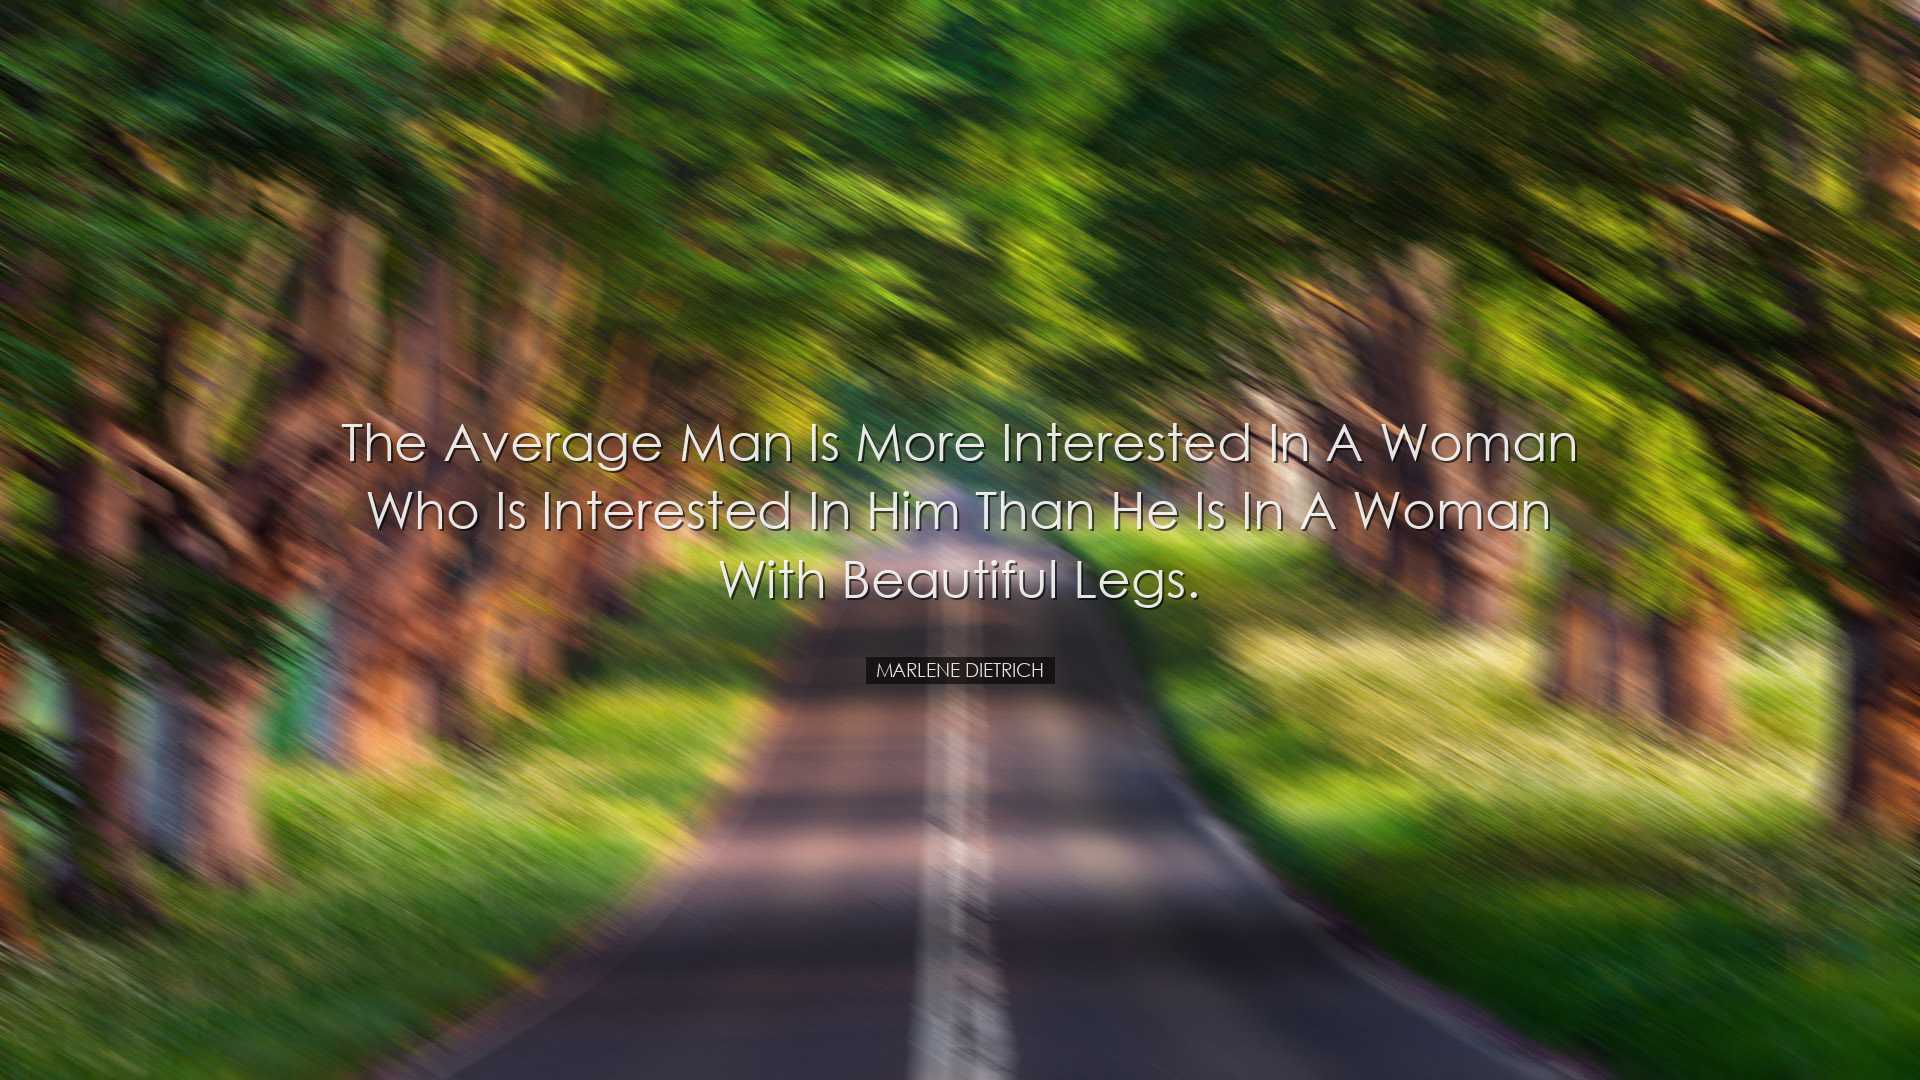 The average man is more interested in a woman who is interested in